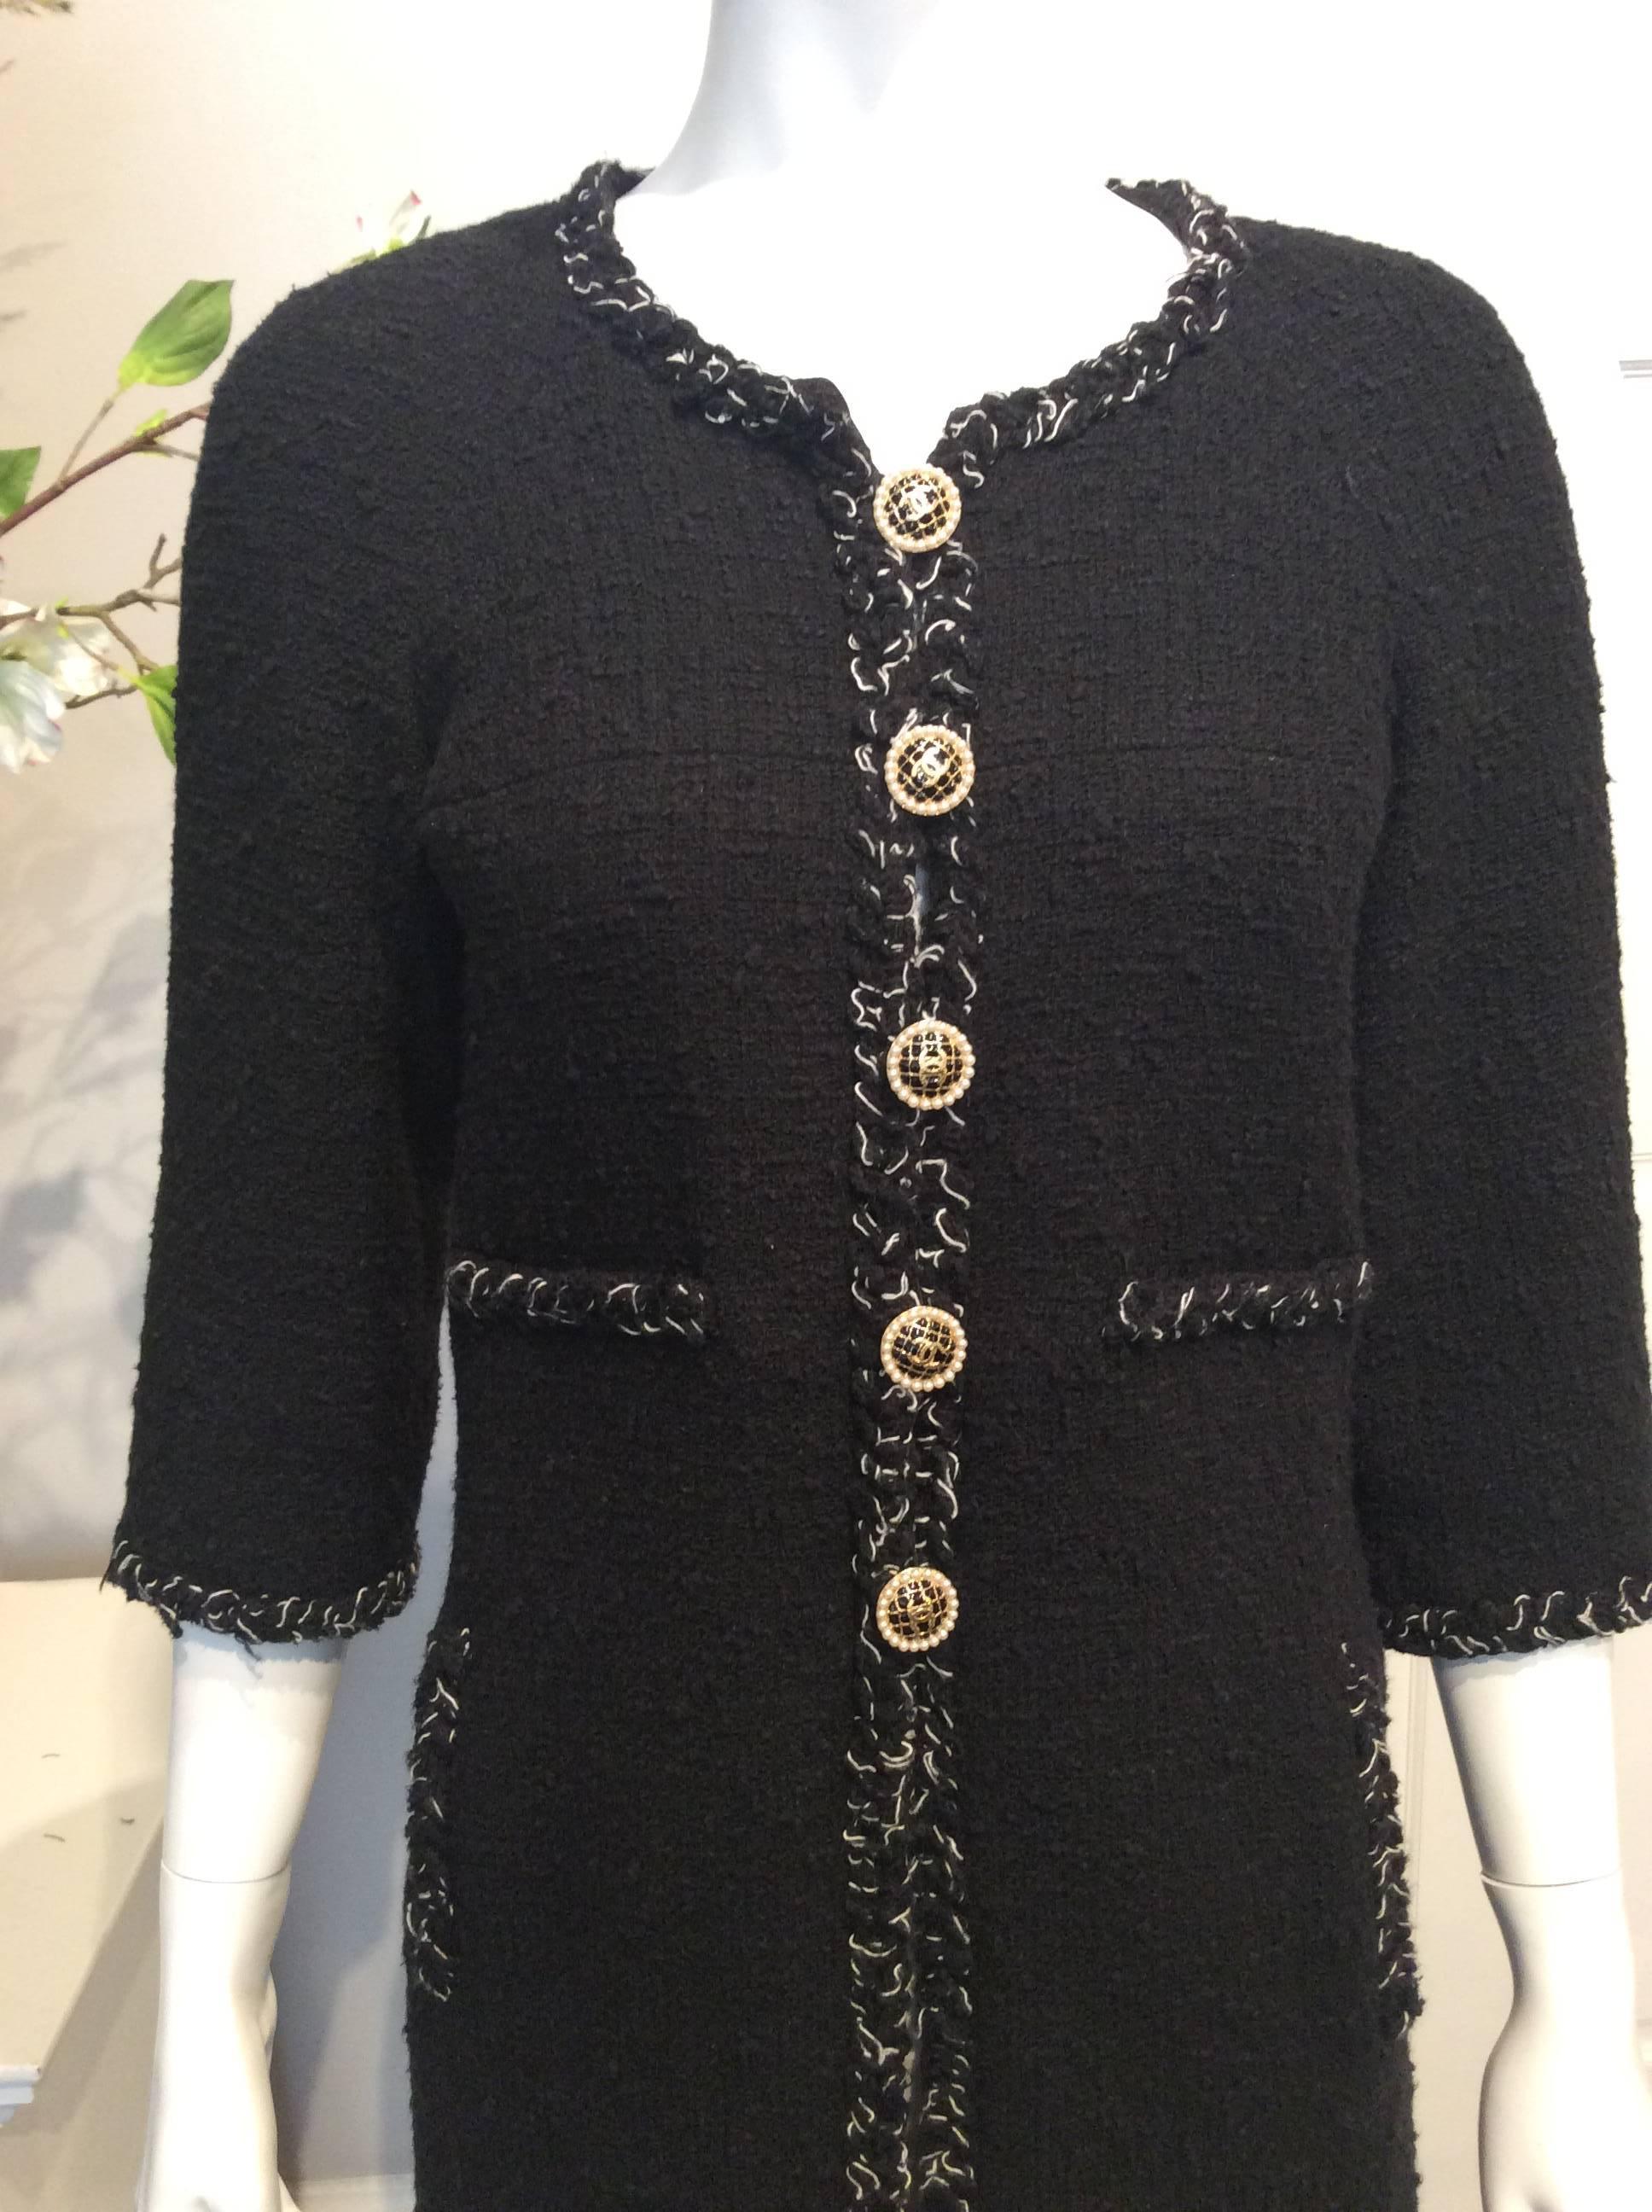 Chanel Black Tweed Coat W/ Braided Trim, Pearl and Black Enamel Buttons Sz36/Us4 For Sale 1